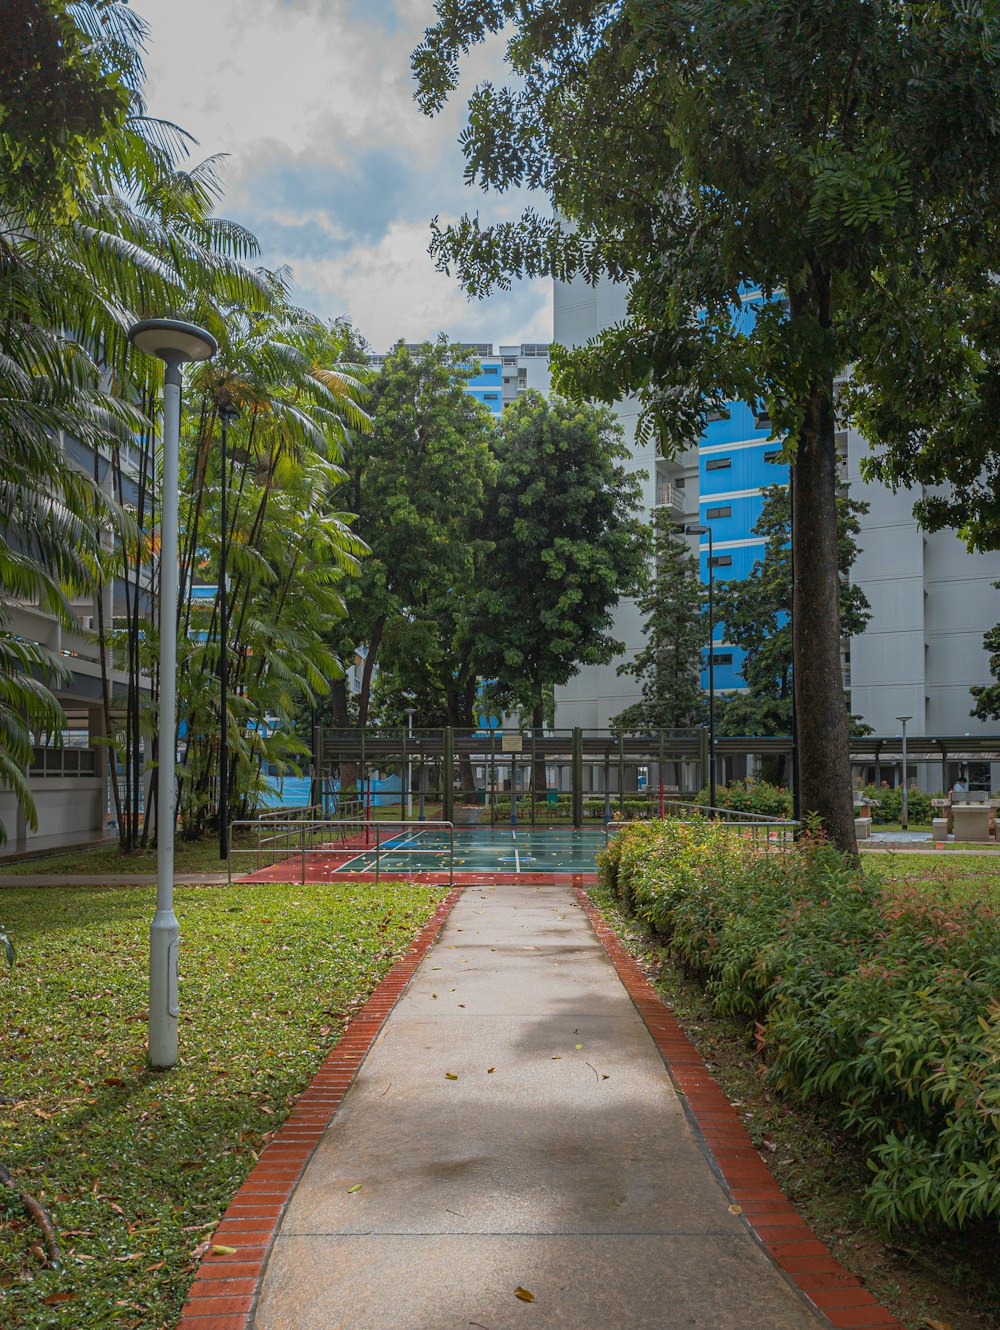 a walkway with trees and buildings in the background